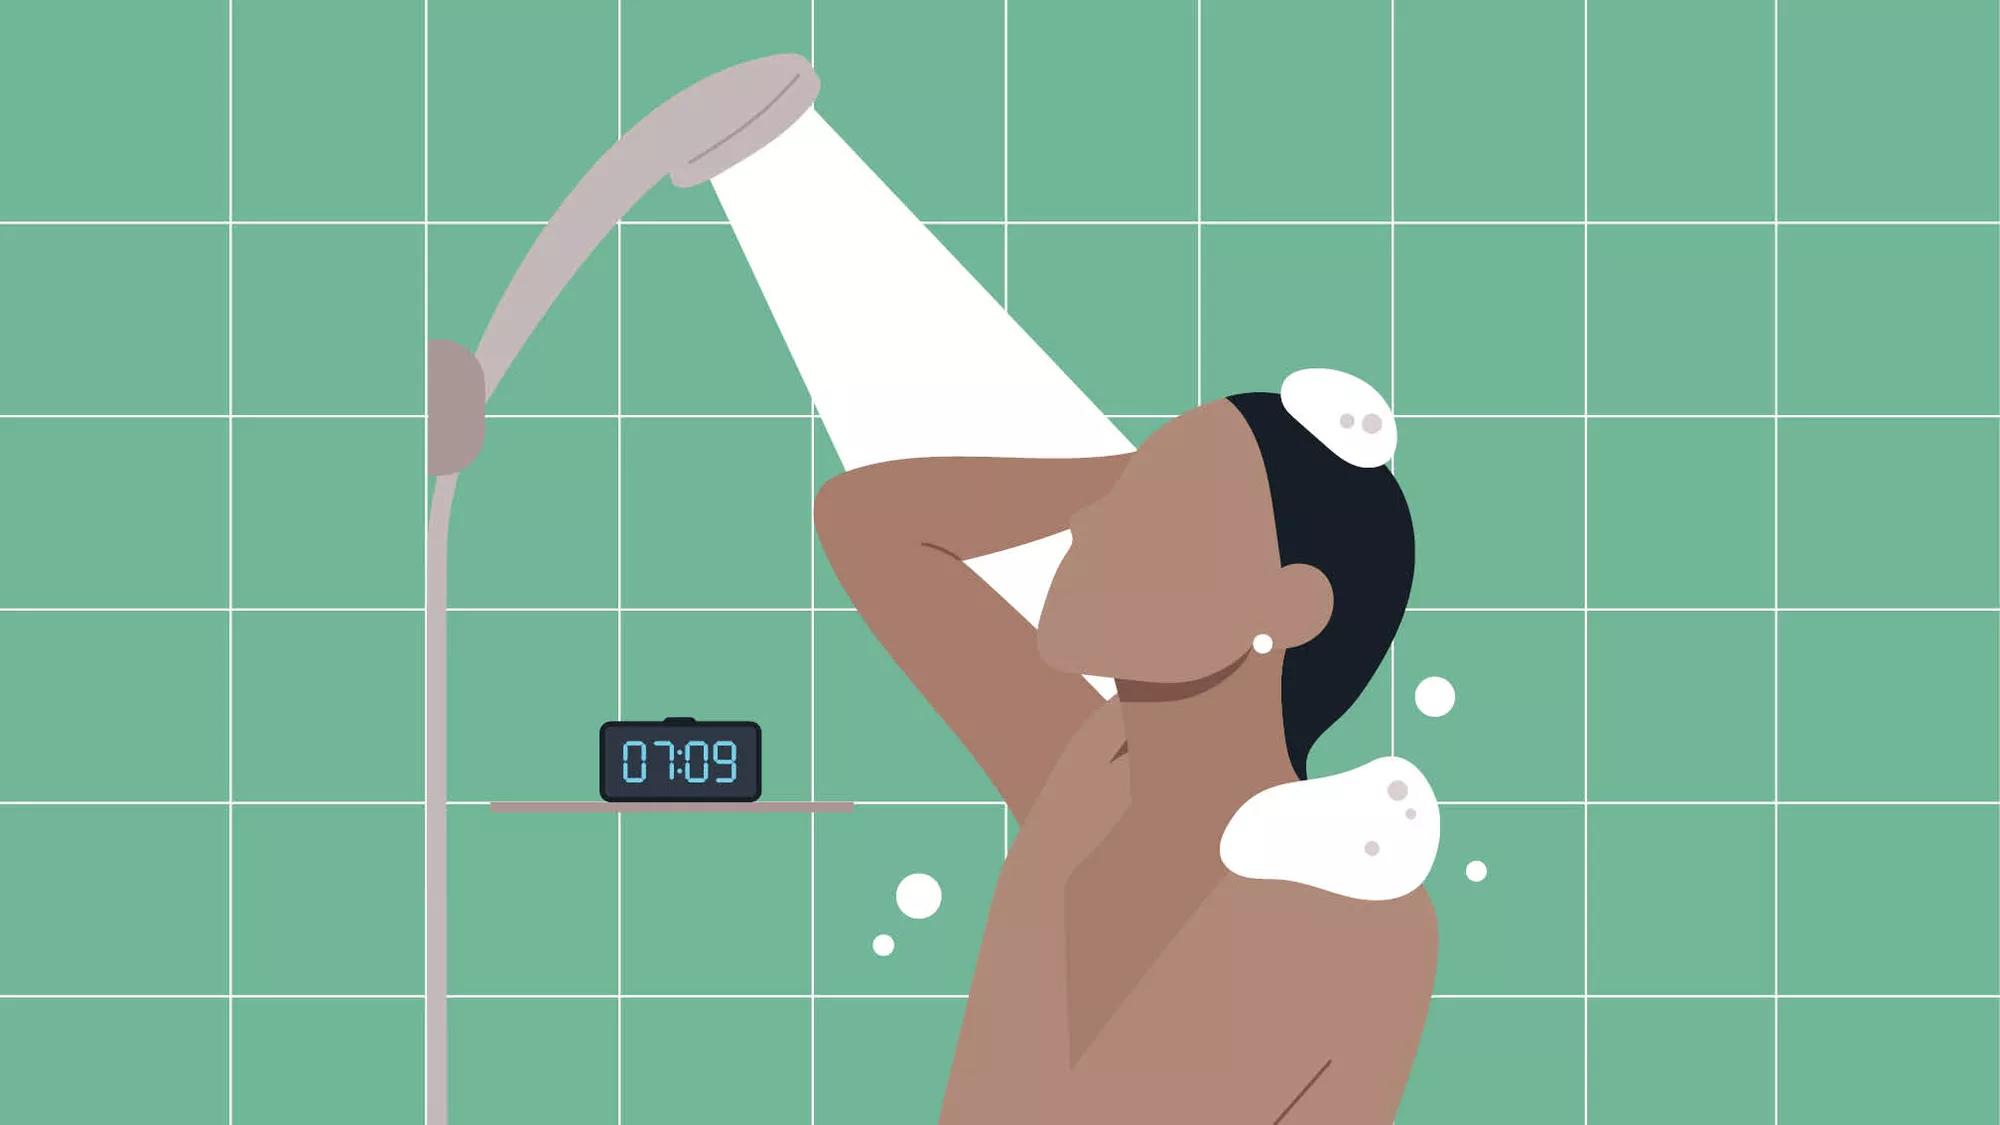 Should You Shower in the Morning, or at Night? Yes - The New York